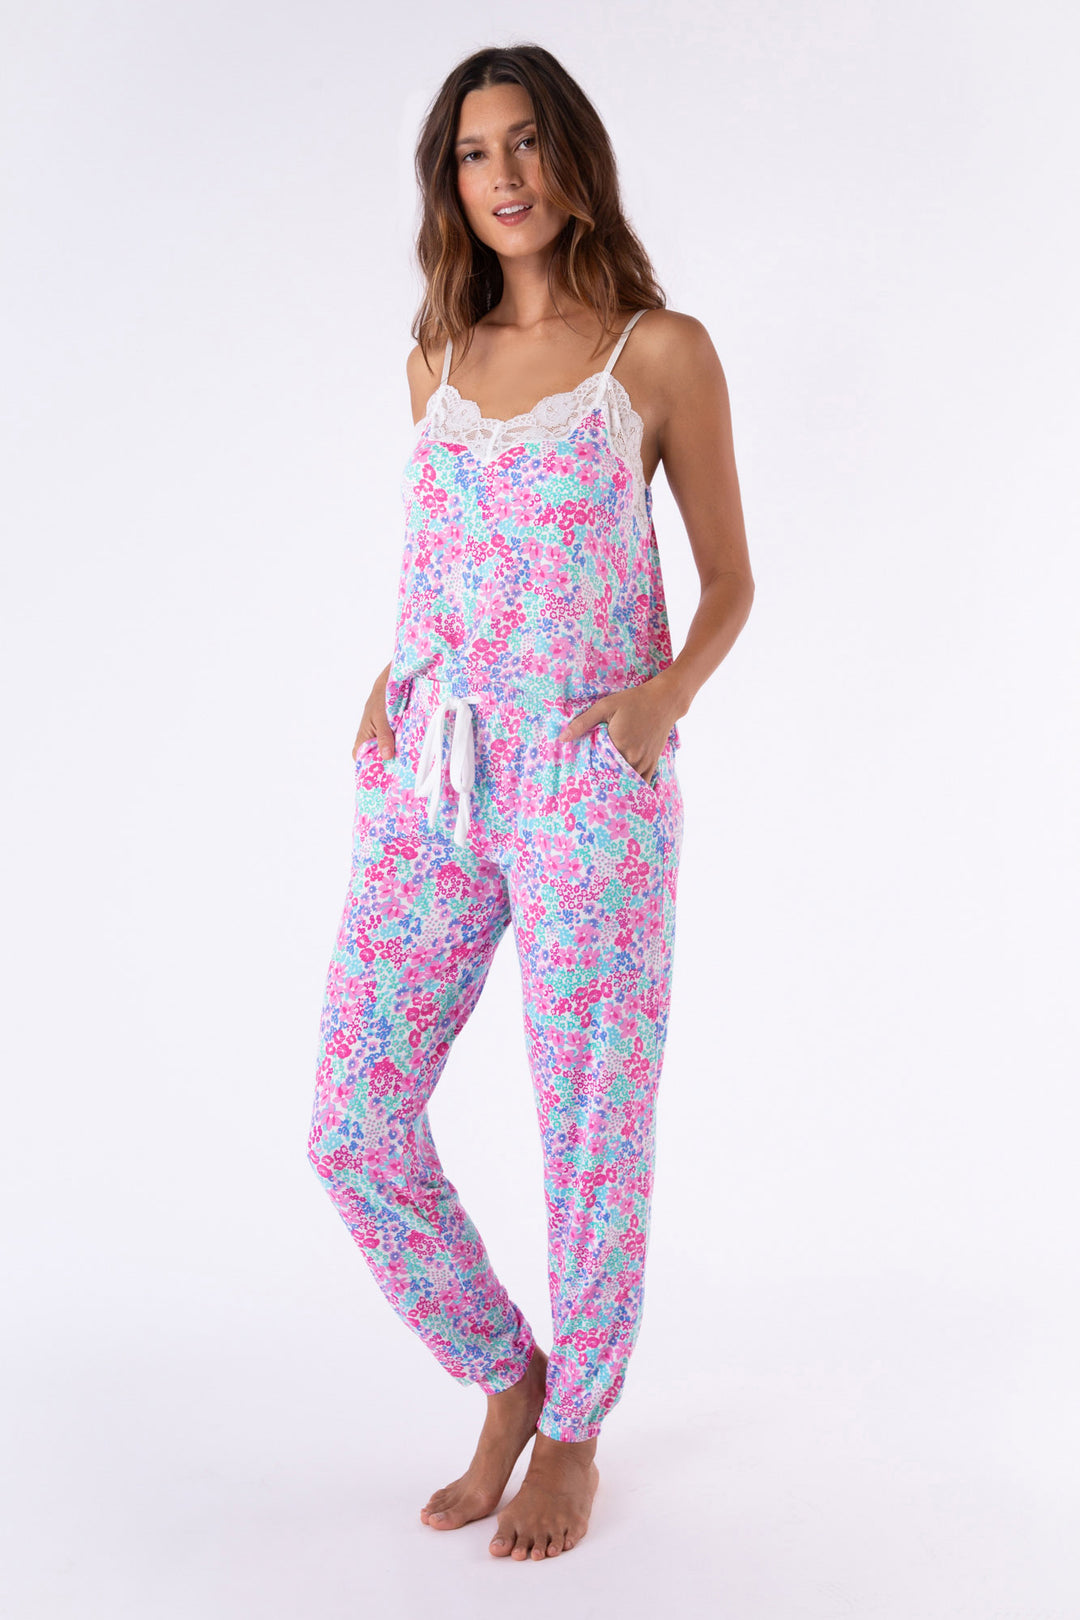 Mini floral print modal cami + jogger sleep set with ivory lace neckline. Exclusive collab design x Ramy Brook.